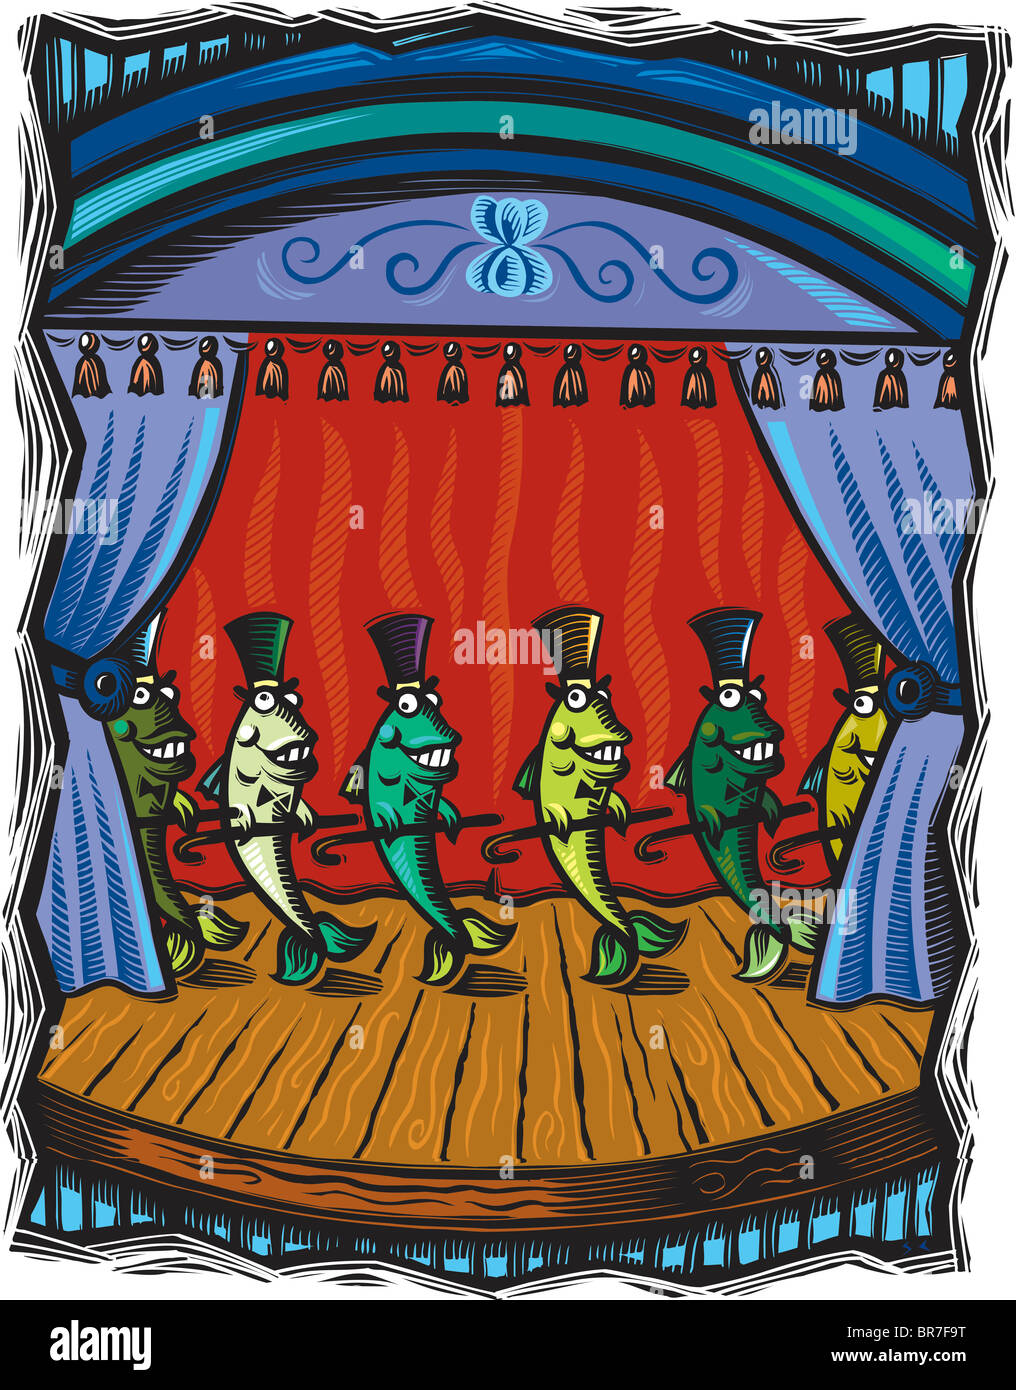 Dancing fish on stage holding canes and wearing top hats Stock Photo - Alamy